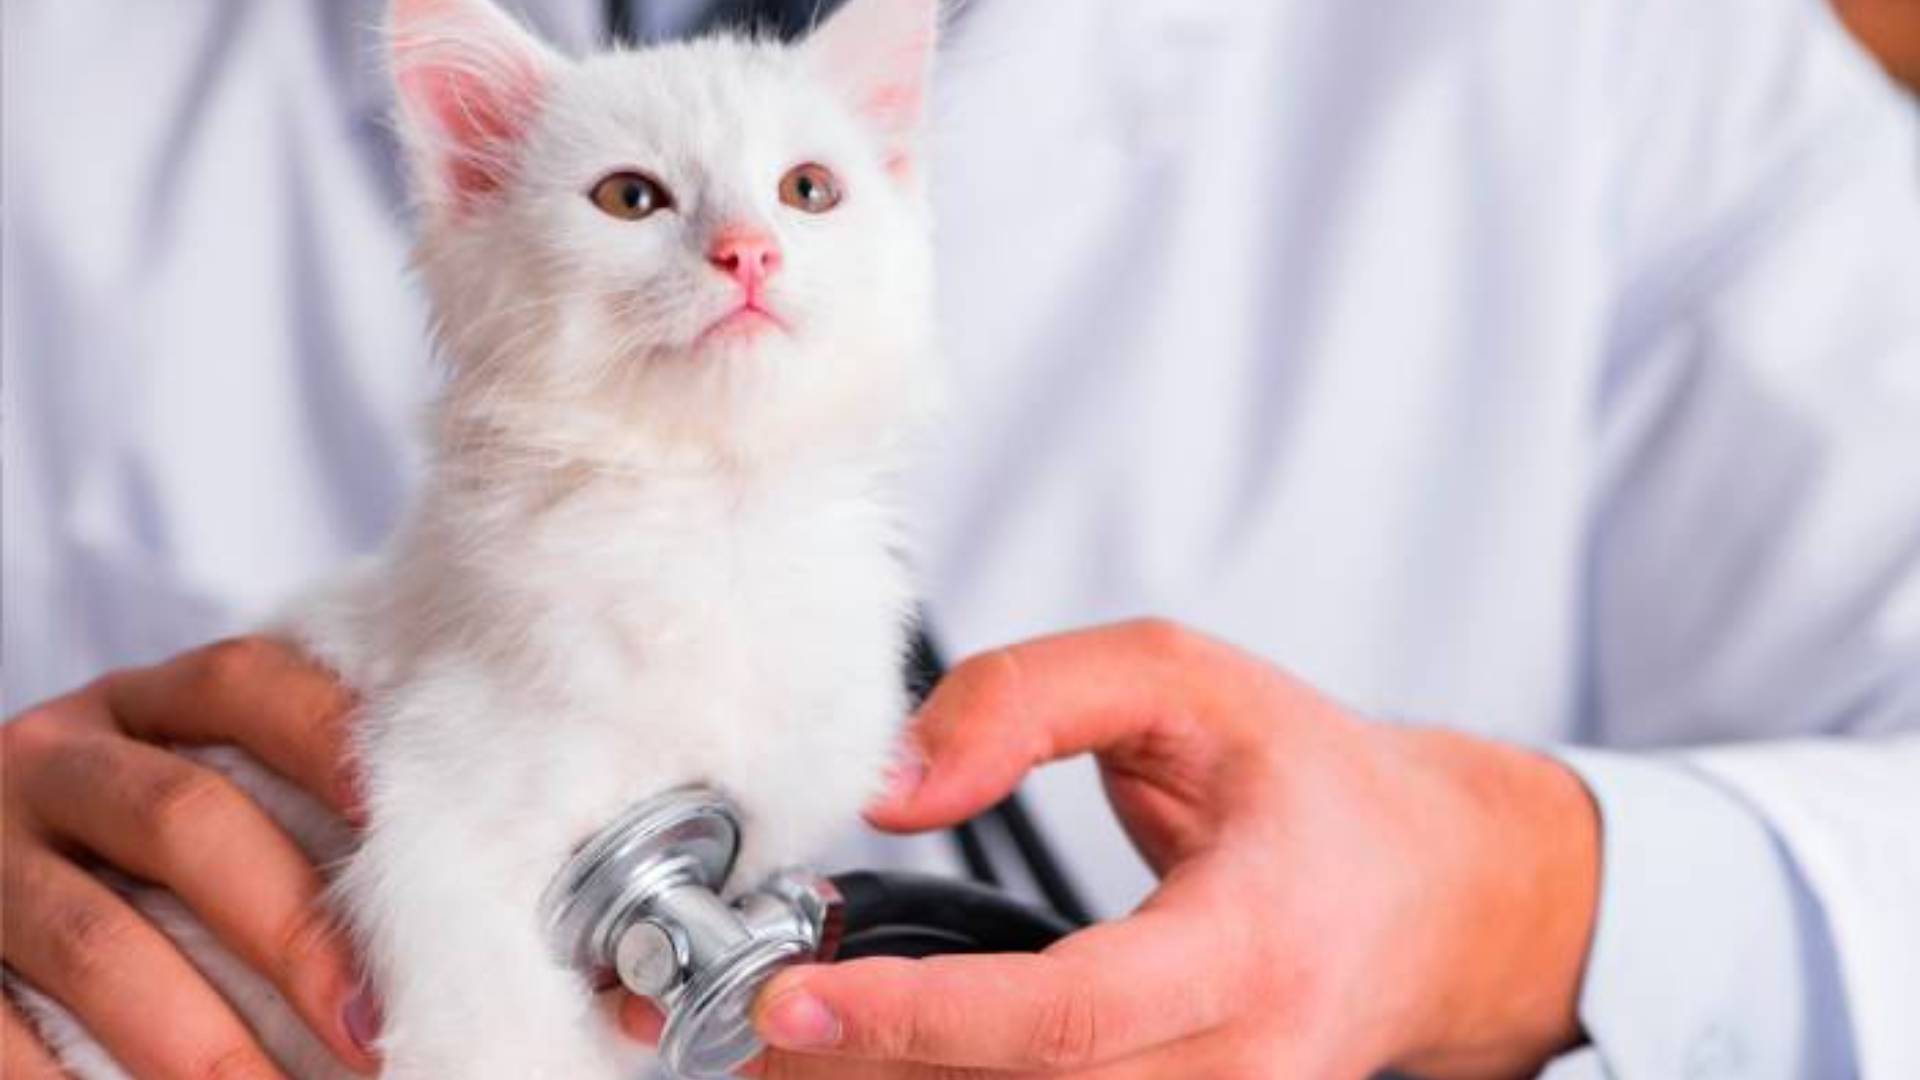 A kitten being examined by a doctor